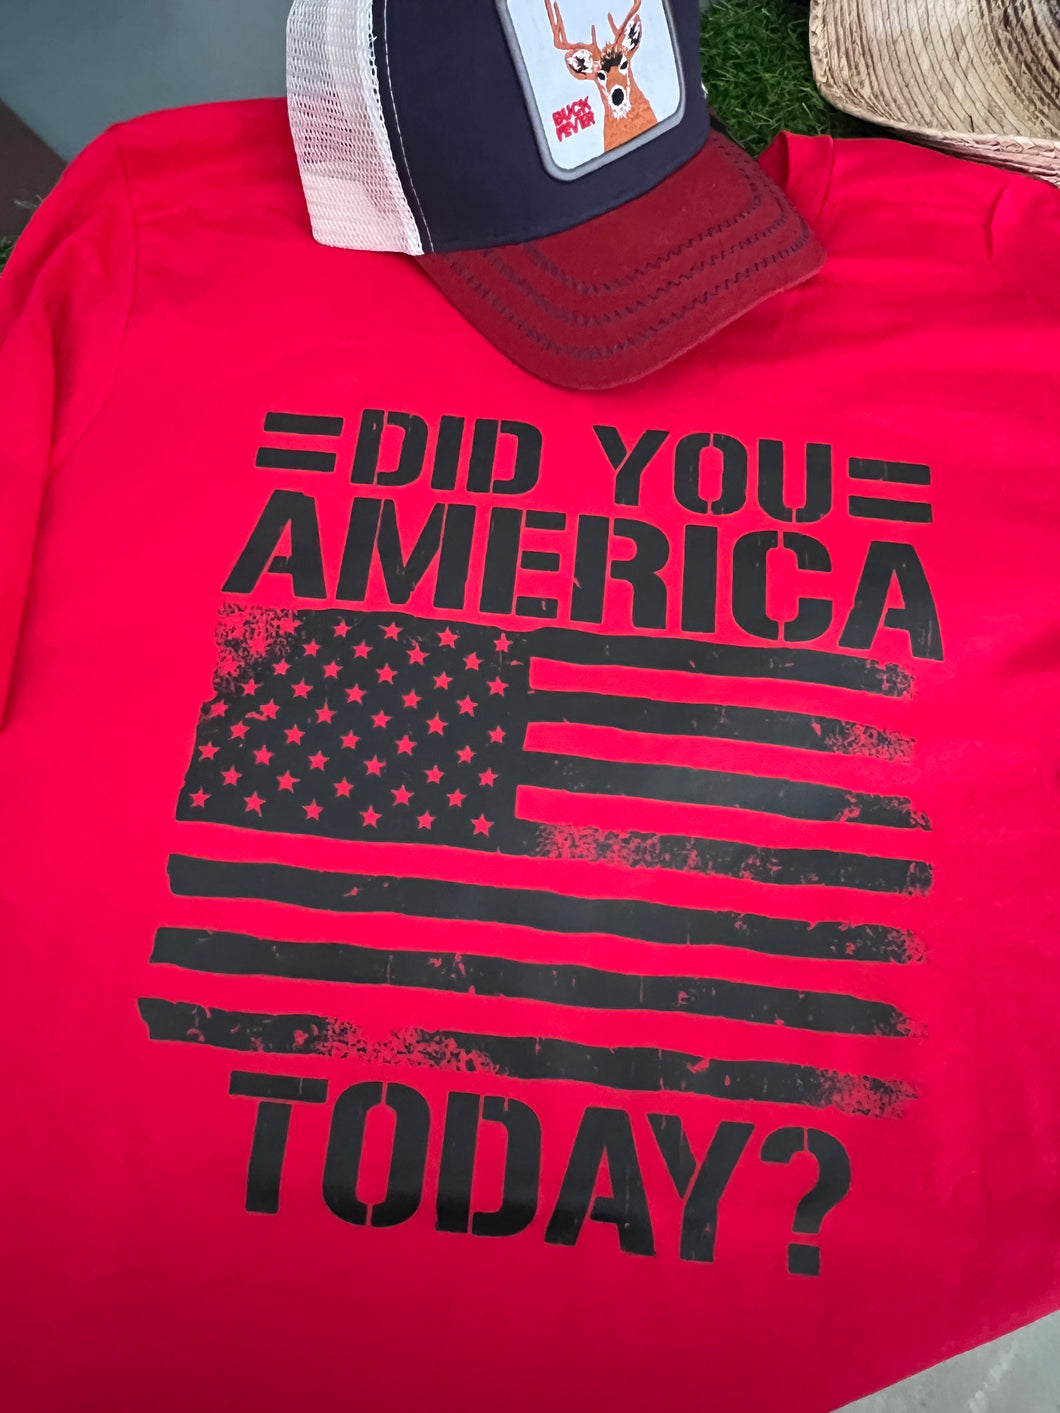 Did You America Today? Tee